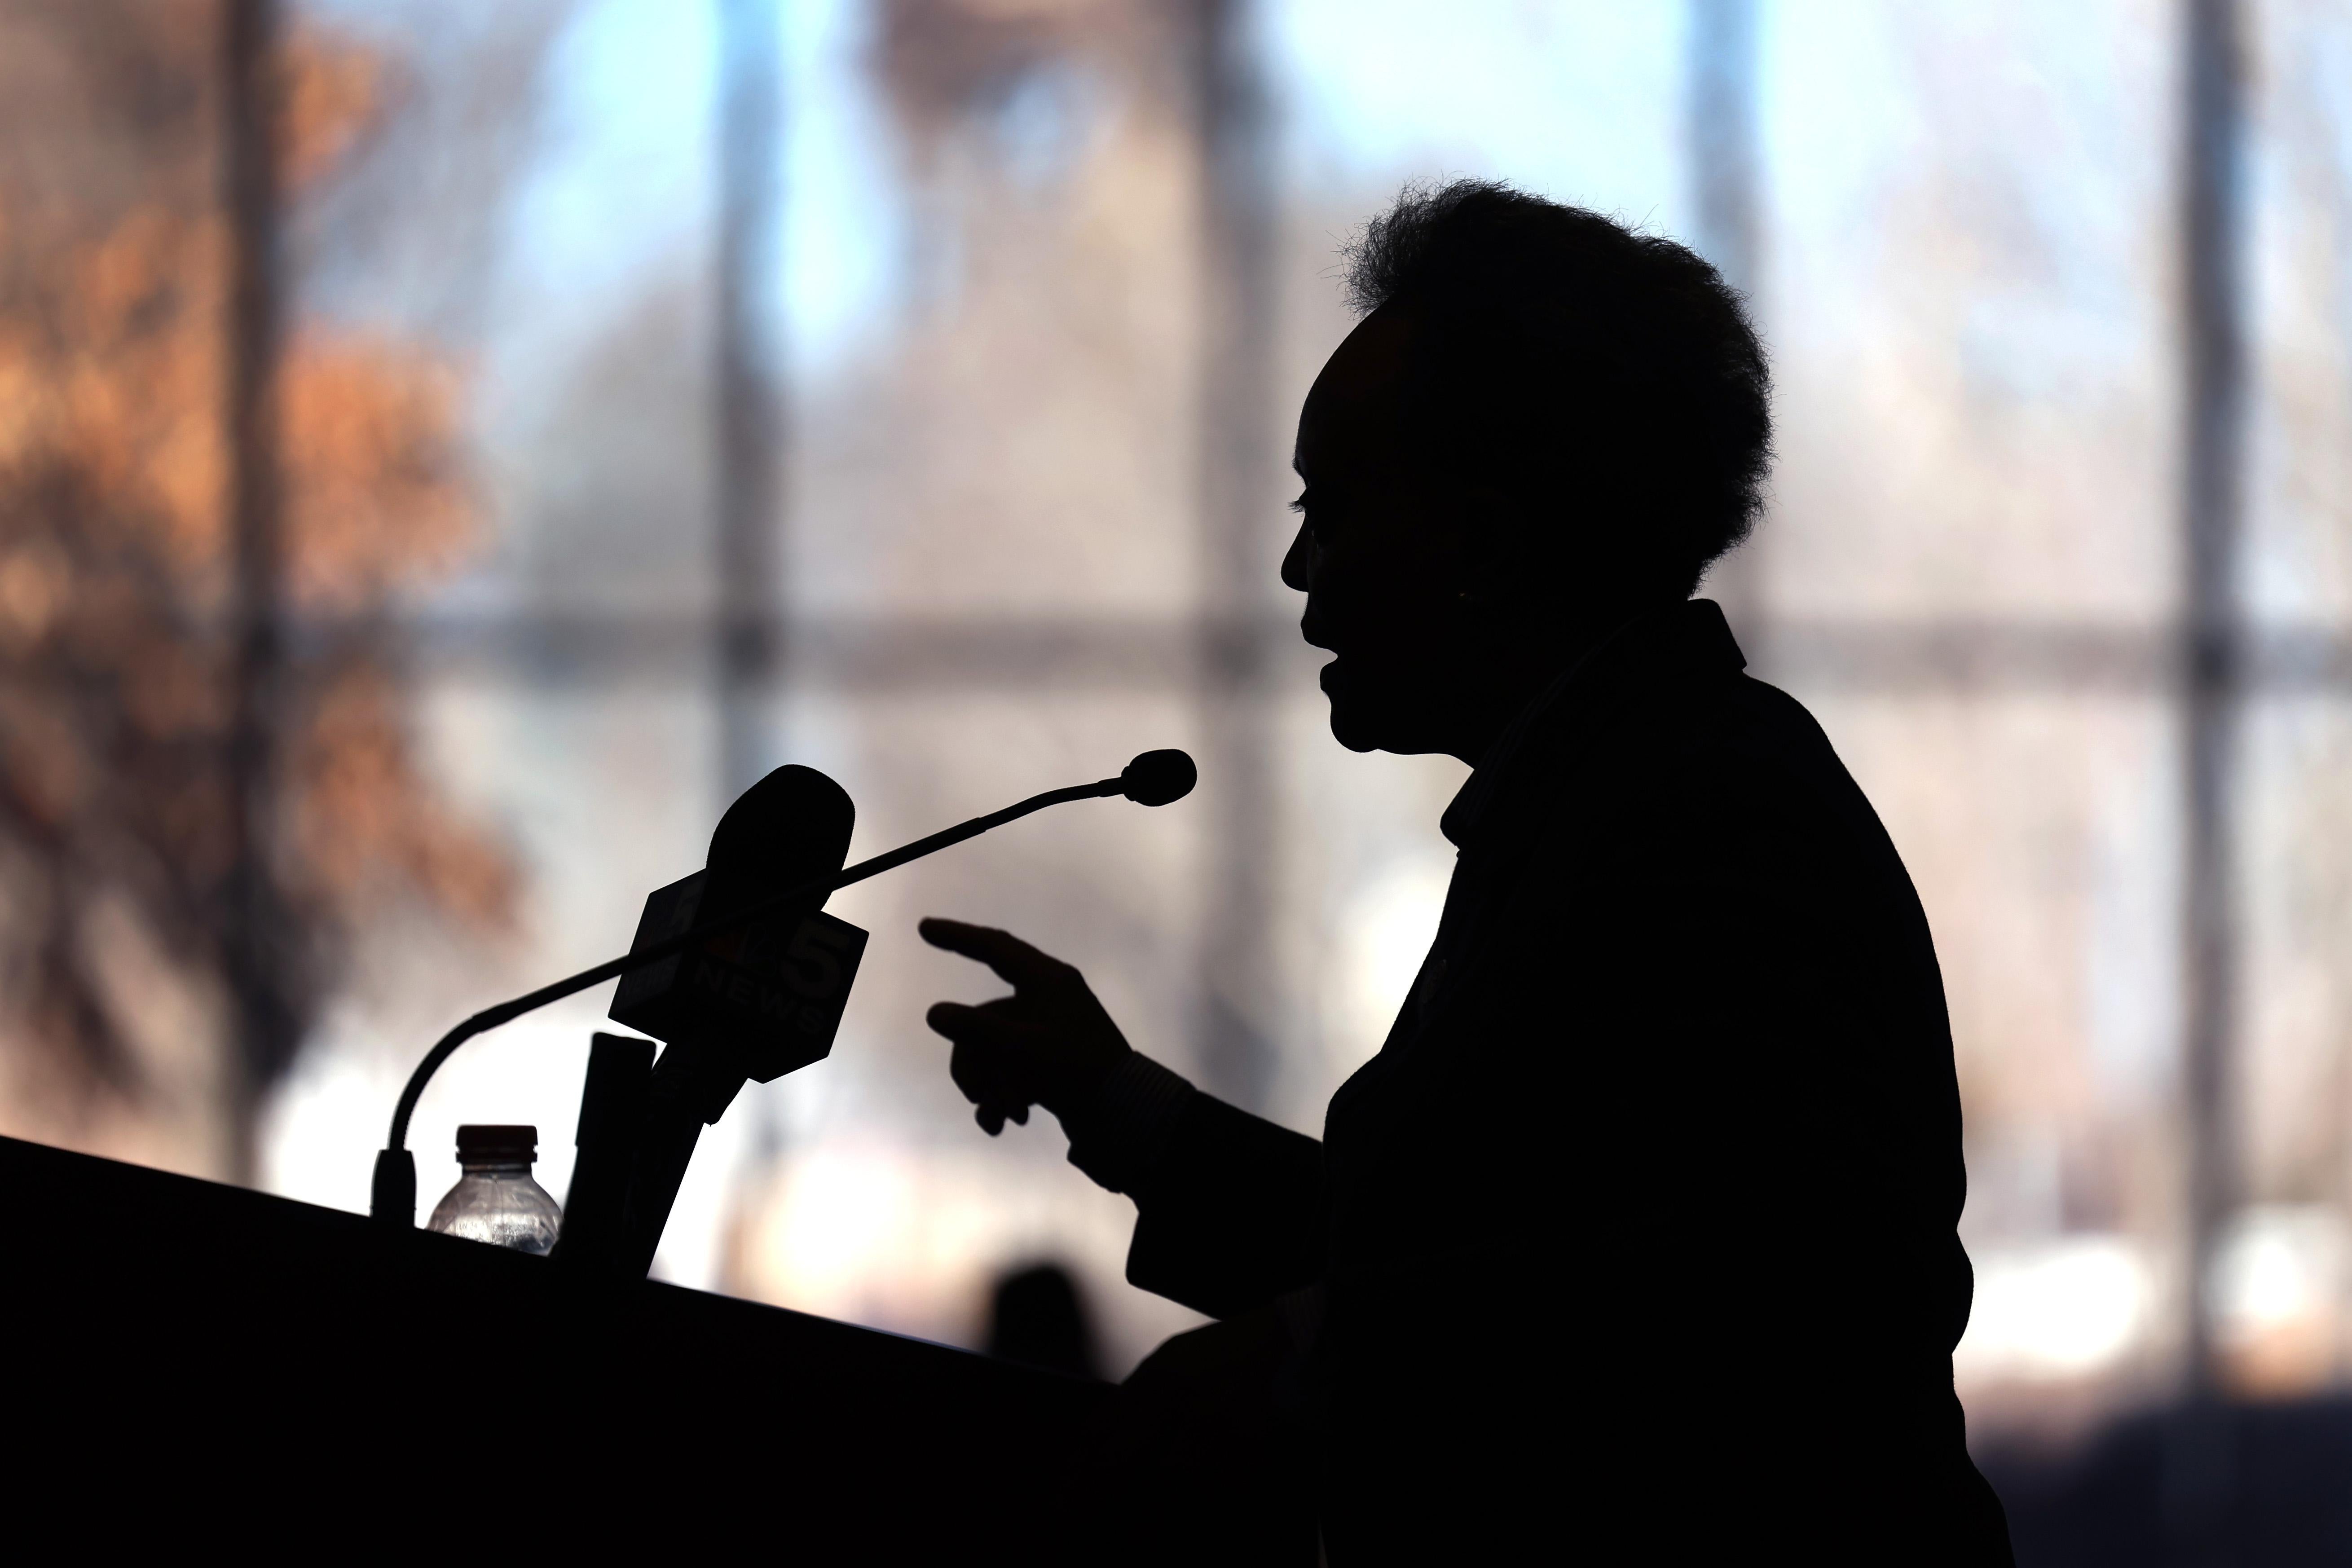 CHICAGO, ILLINOIS - FEBRUARY 25: Chicago Mayor Lori Lightfoot speaks to supporters at a campaign rally on February 25, 2023 in Chicago, Illinois.  With Election Day just days away on February 28, Lightfoot is facing eight contenders in the mayoral race. (Photo by Scott Olson/Getty Images)